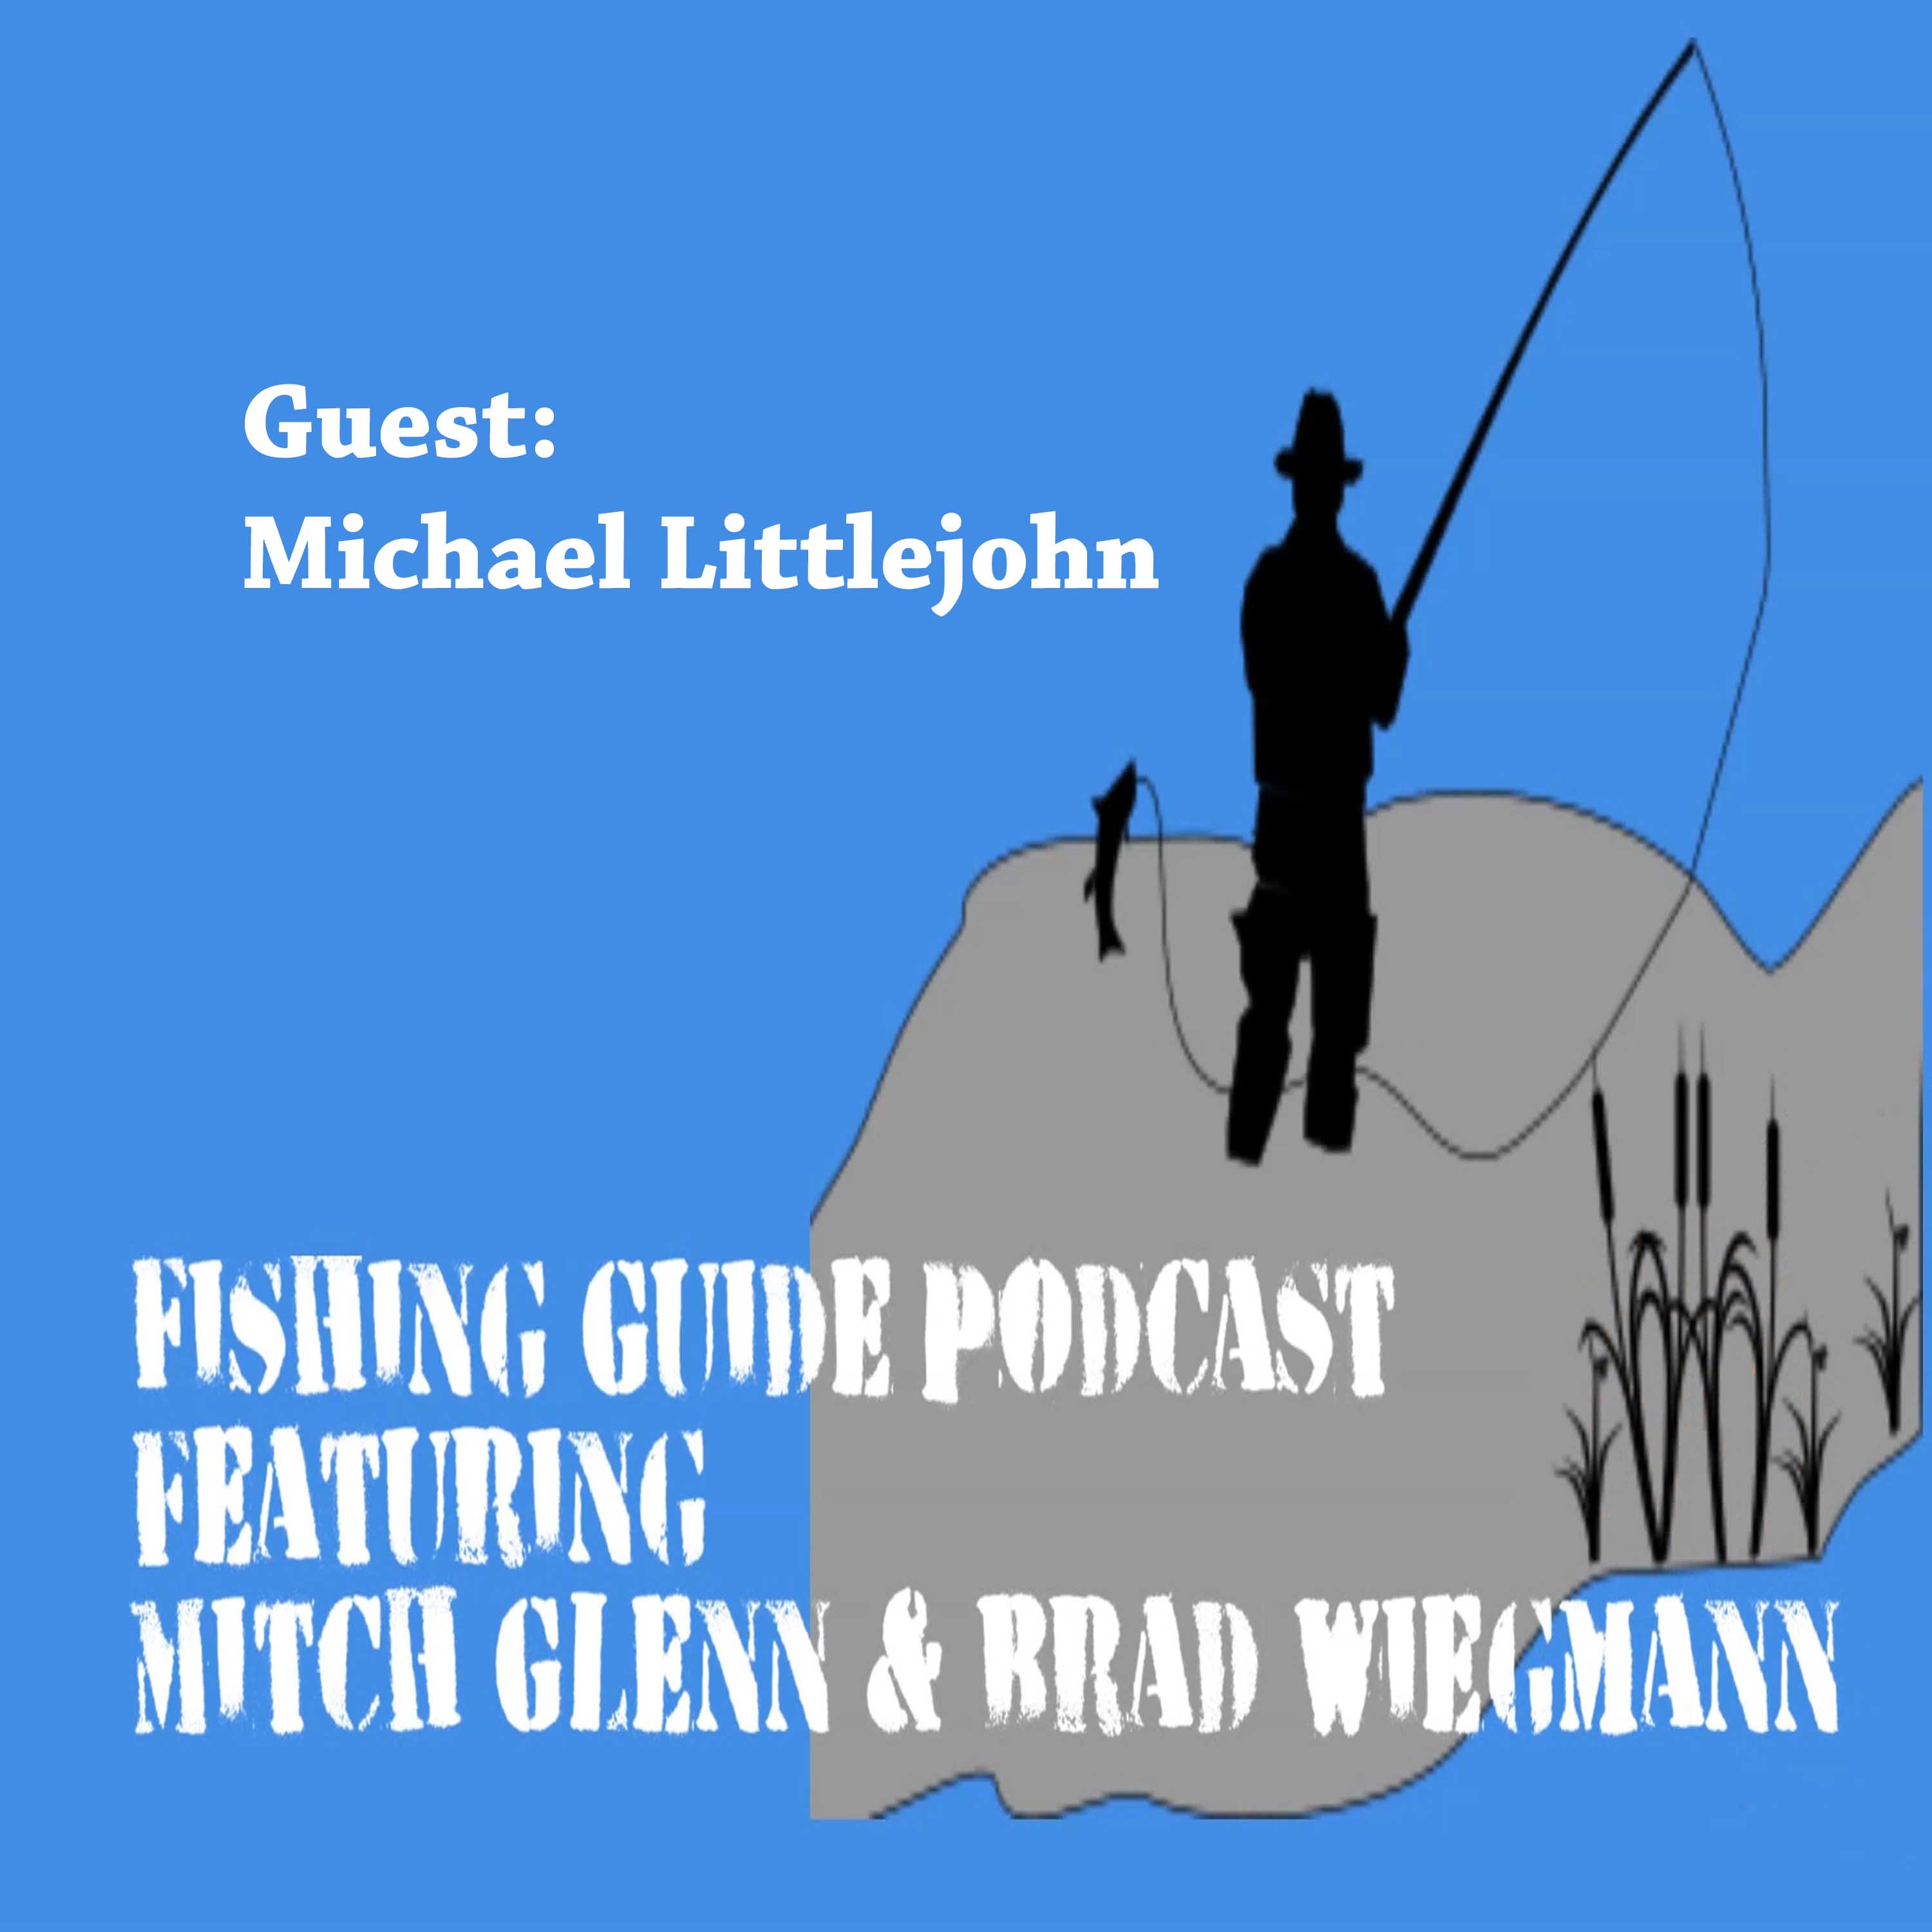 In episode 21 Captain Michael Littlejohn with Lake Tawakoni Guide Service talks about specializing in multi-species guide trips; in addition to operating a resort on the shoreline of Lake Tawakoni